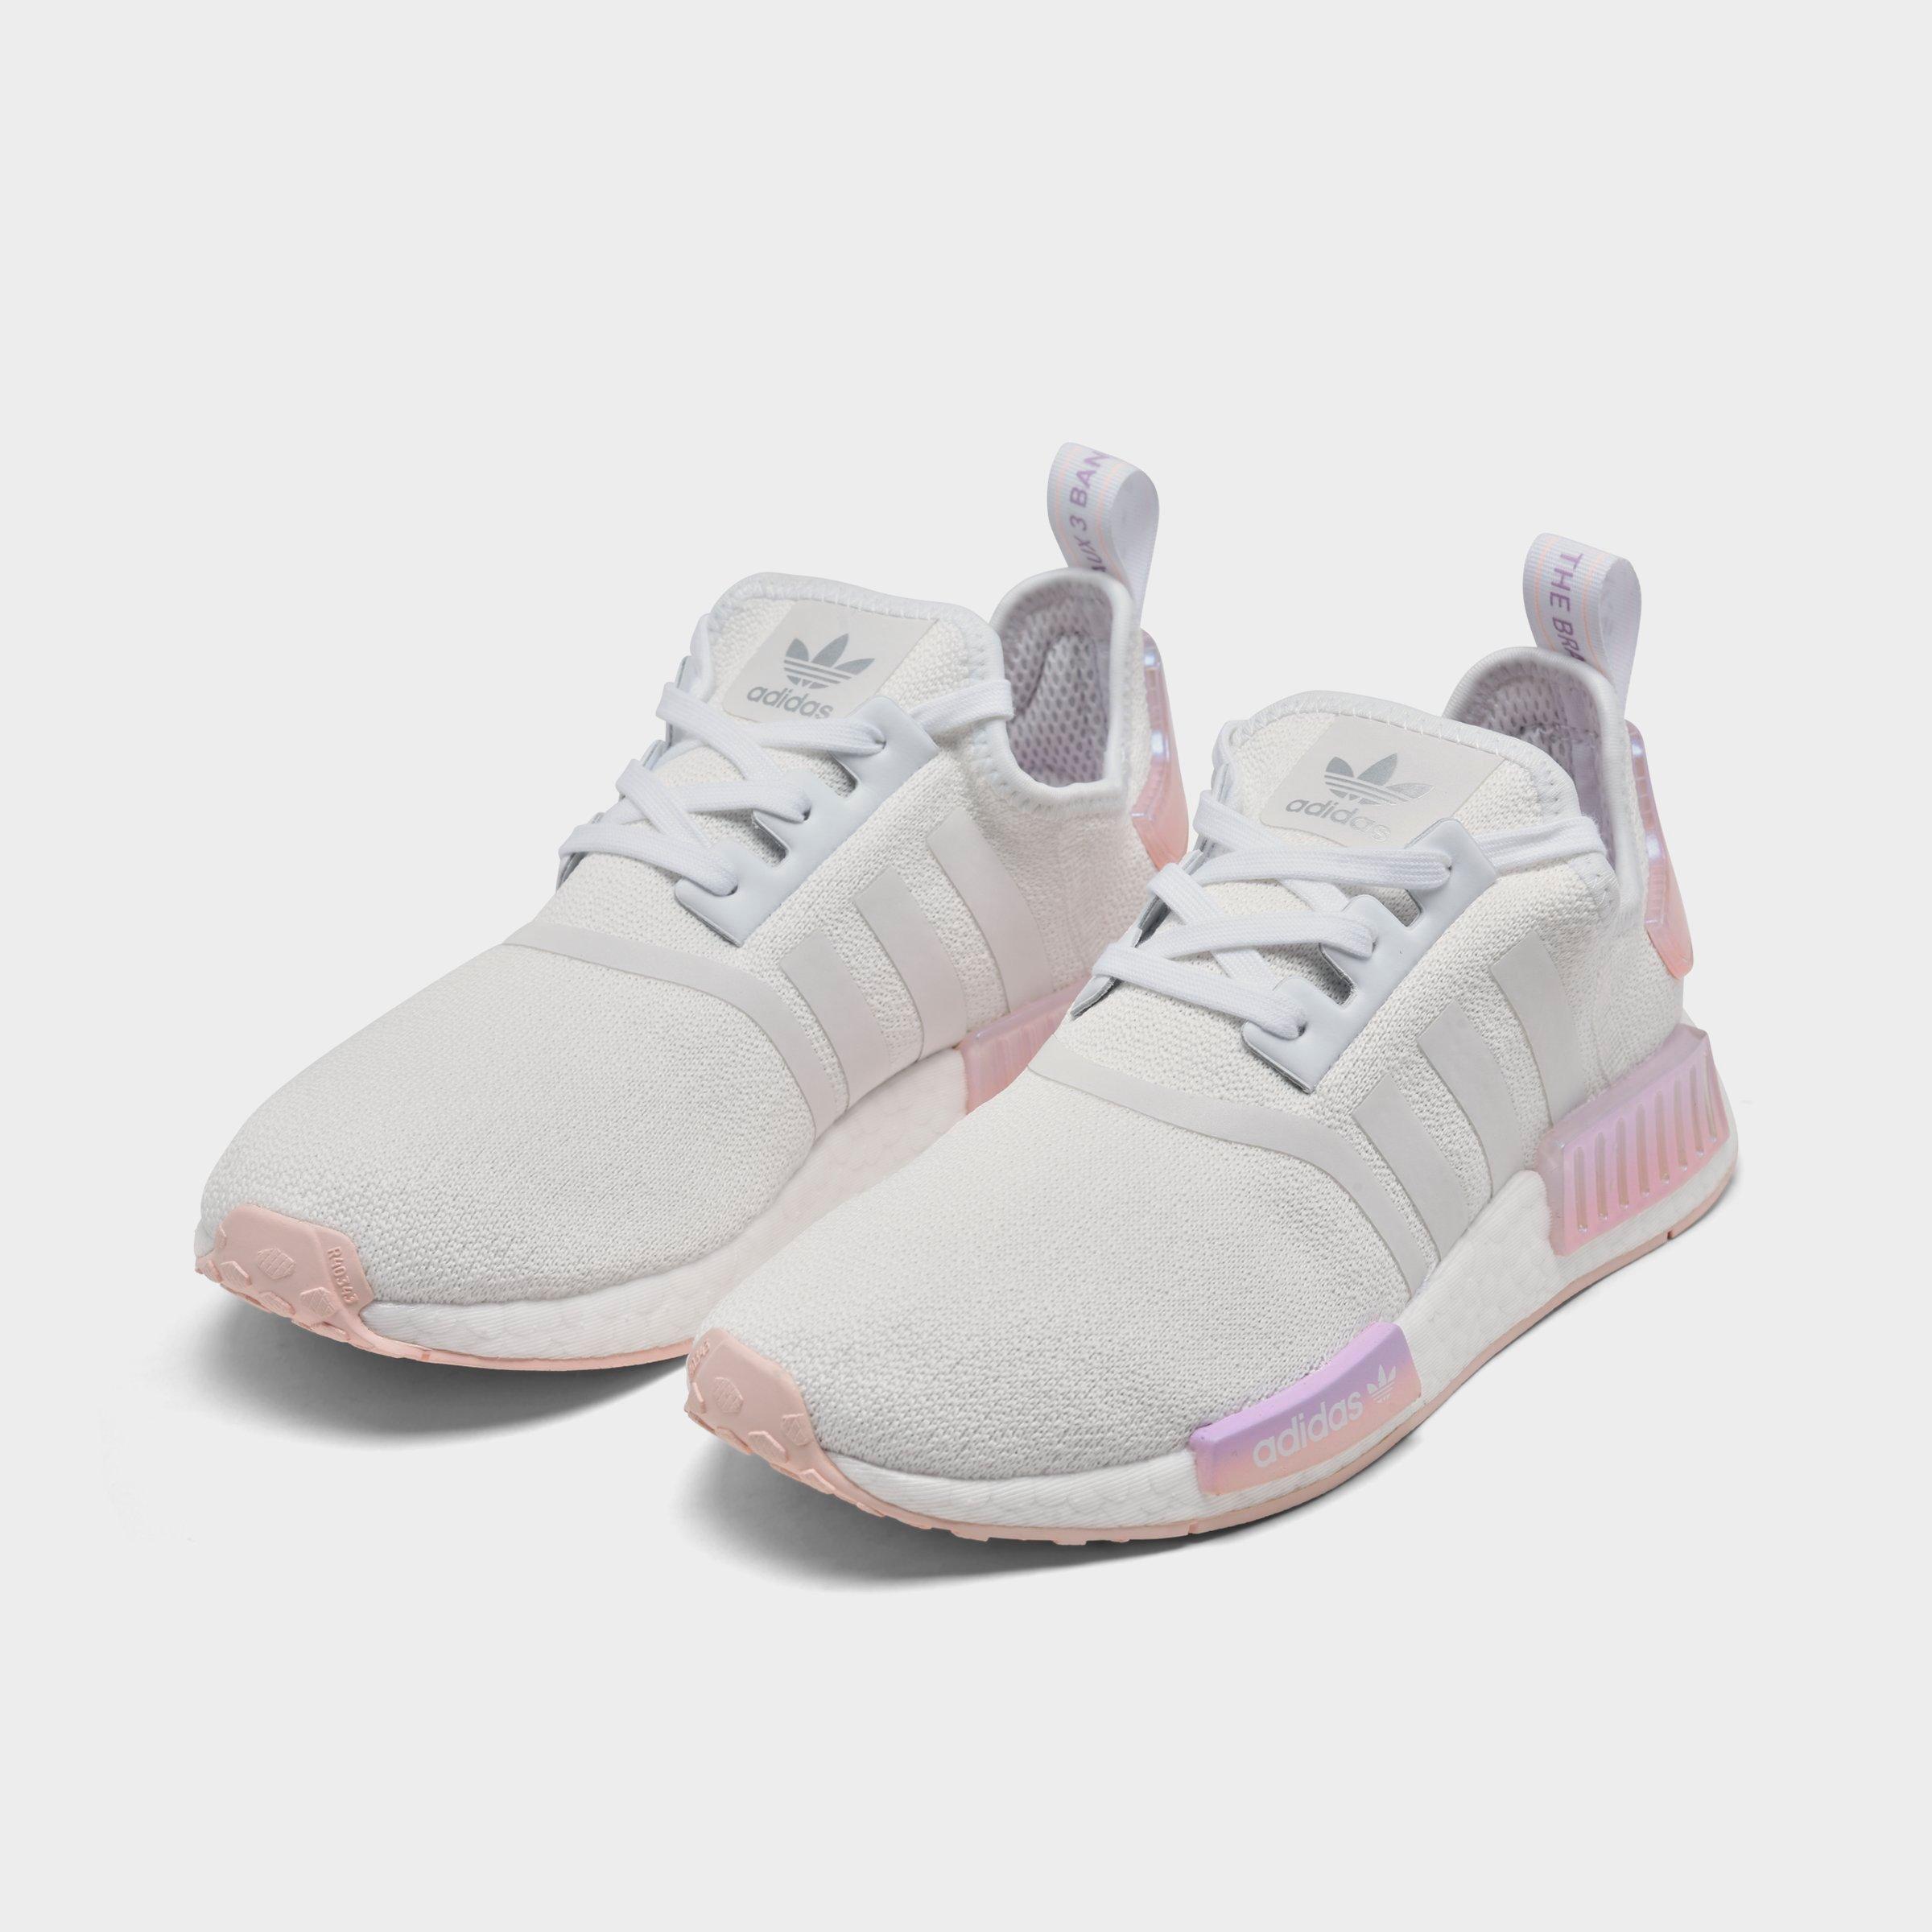 nmds for women